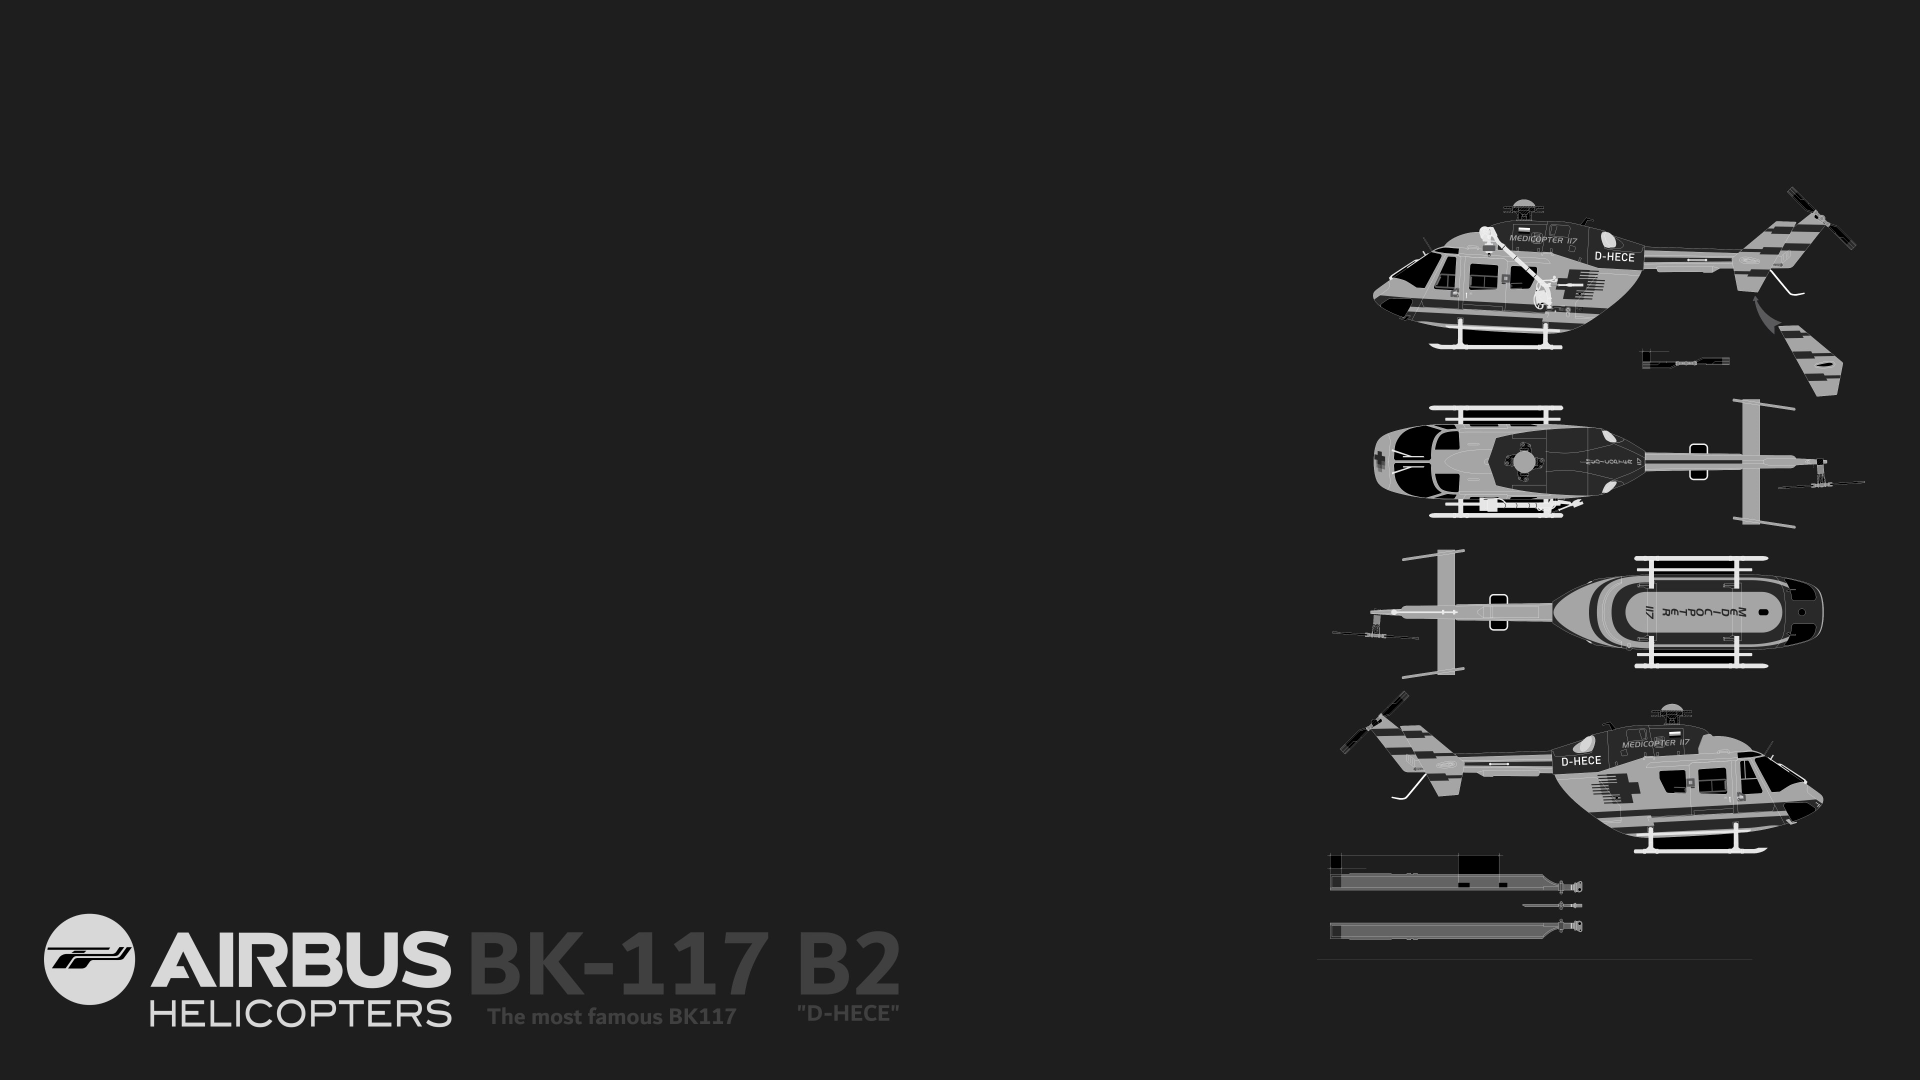 General 1920x1080 helicopters BK117 Airbus aircraft vehicle simple background numbers french aircraft